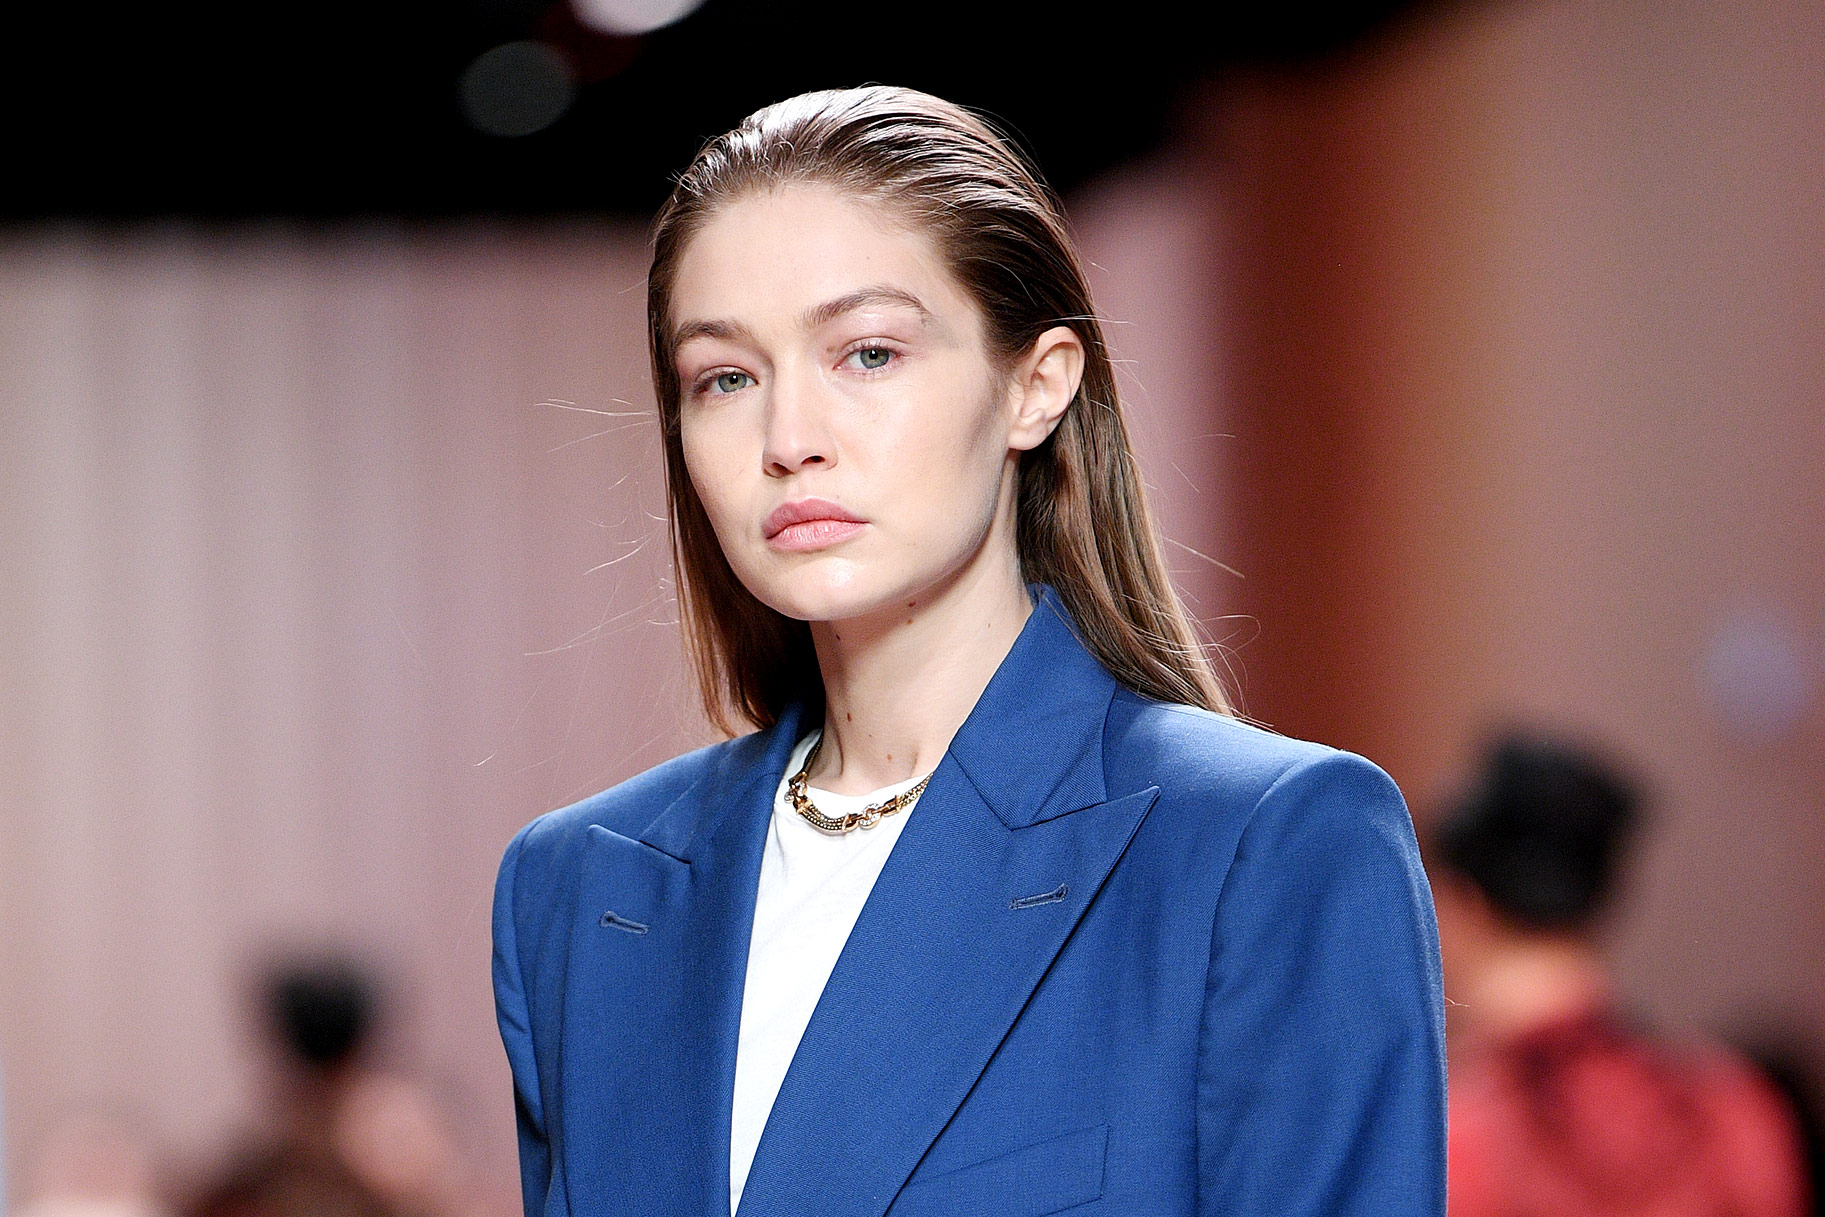 Gigi Hadid Says Volleyball Body Made Runway Modeling Difficult